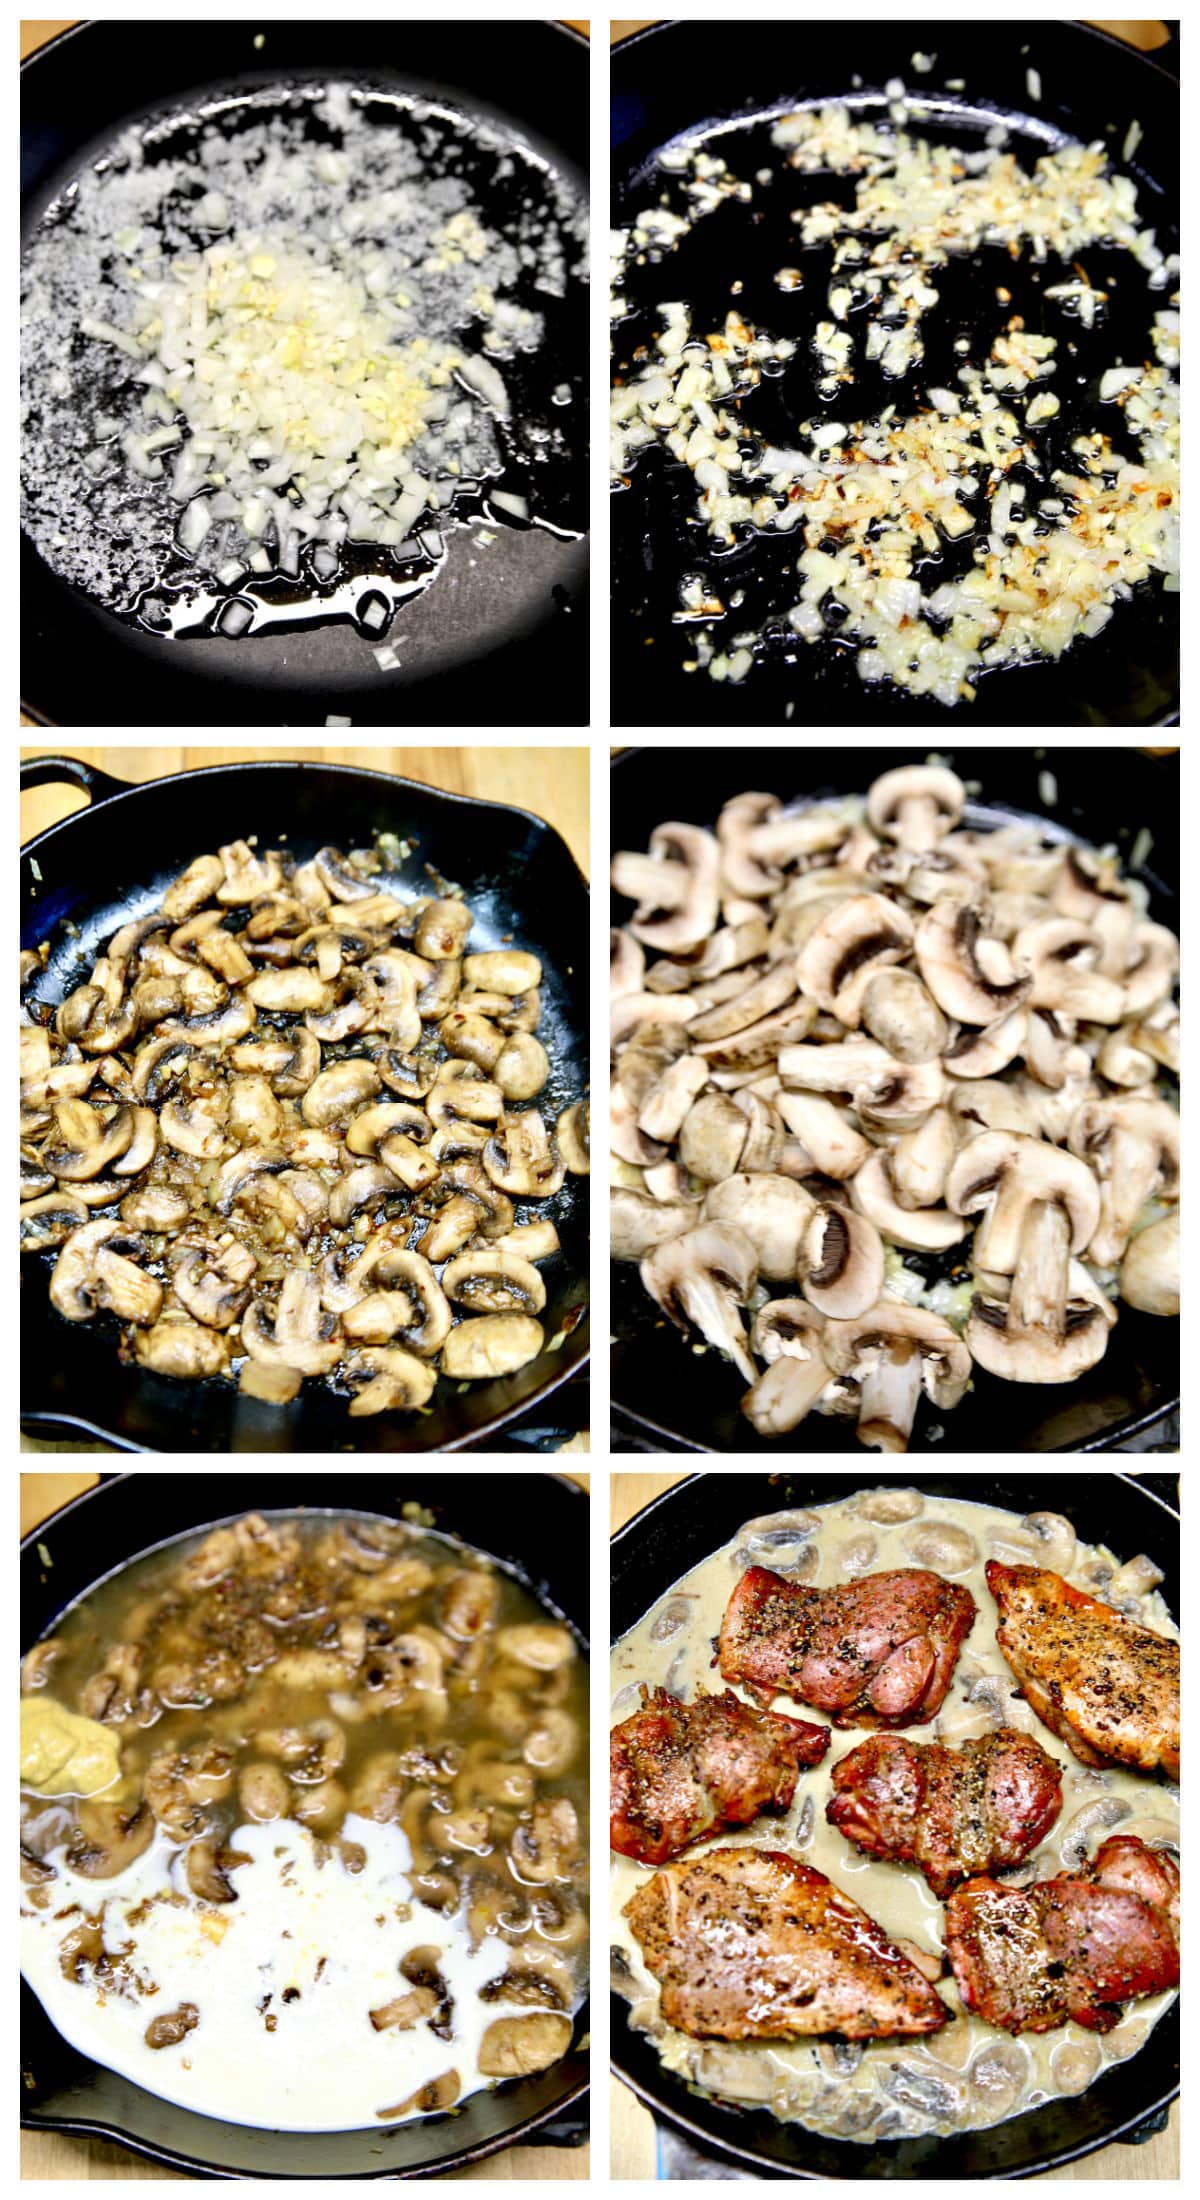 Collage making Diane sauce with onions, garlic, mushrooms, cream for chicken.